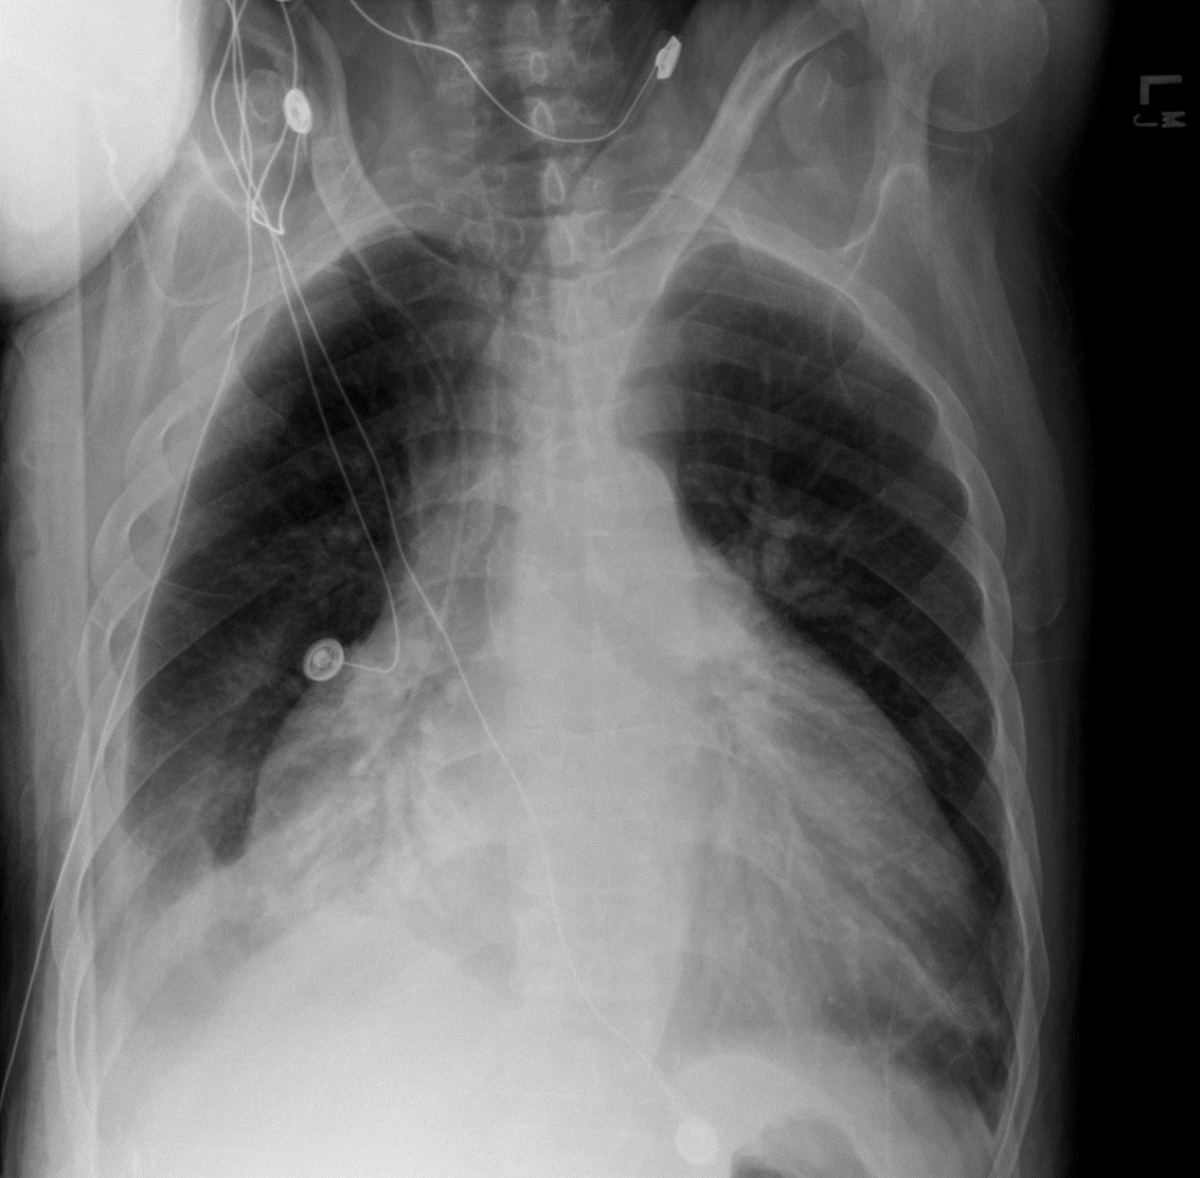 Chest x-ray showing pericardial effusion